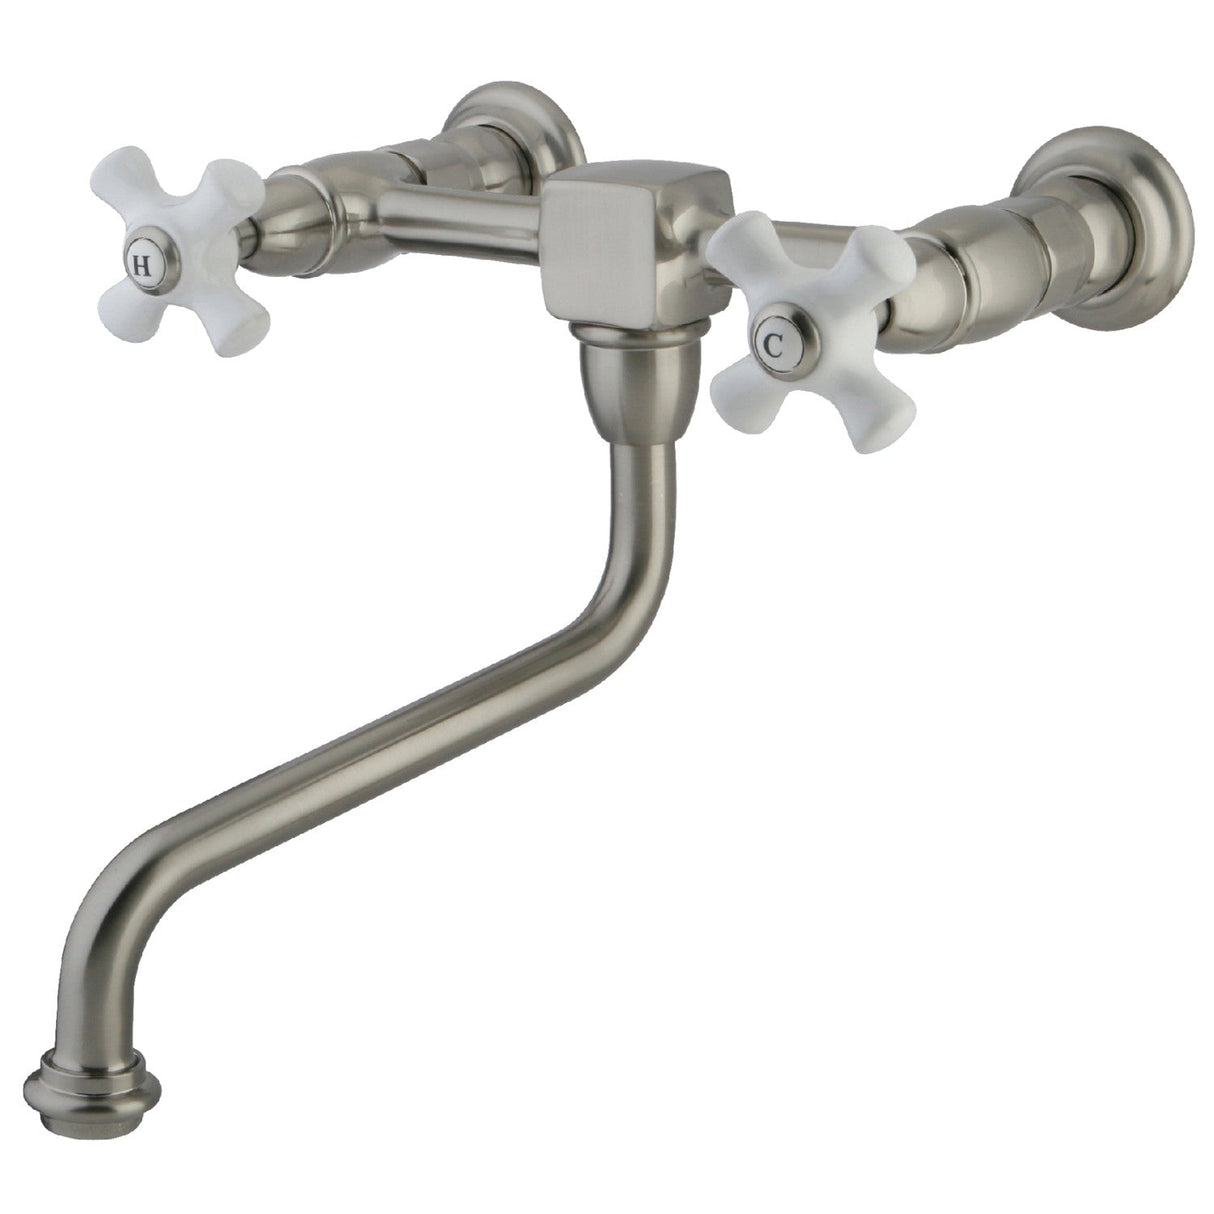 Heritage KS1218PX Two-Handle 2-Hole Wall Mount Bathroom Faucet, Brushed Nickel